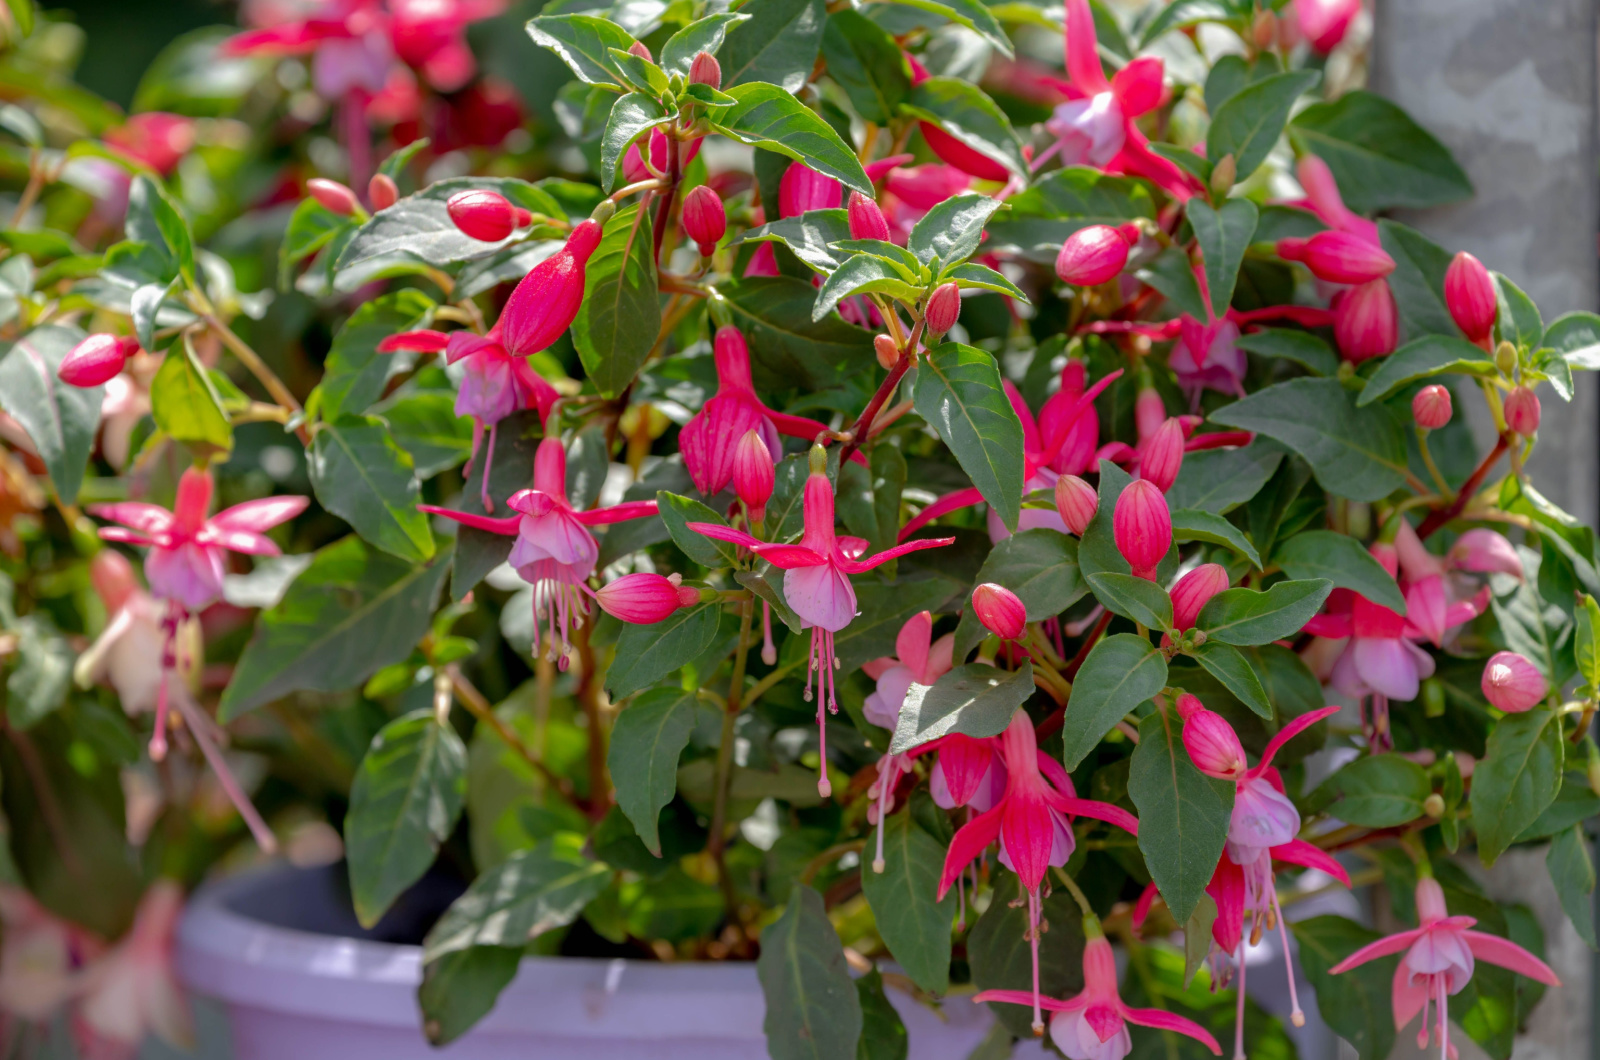 fuchsia plant with pink flowers